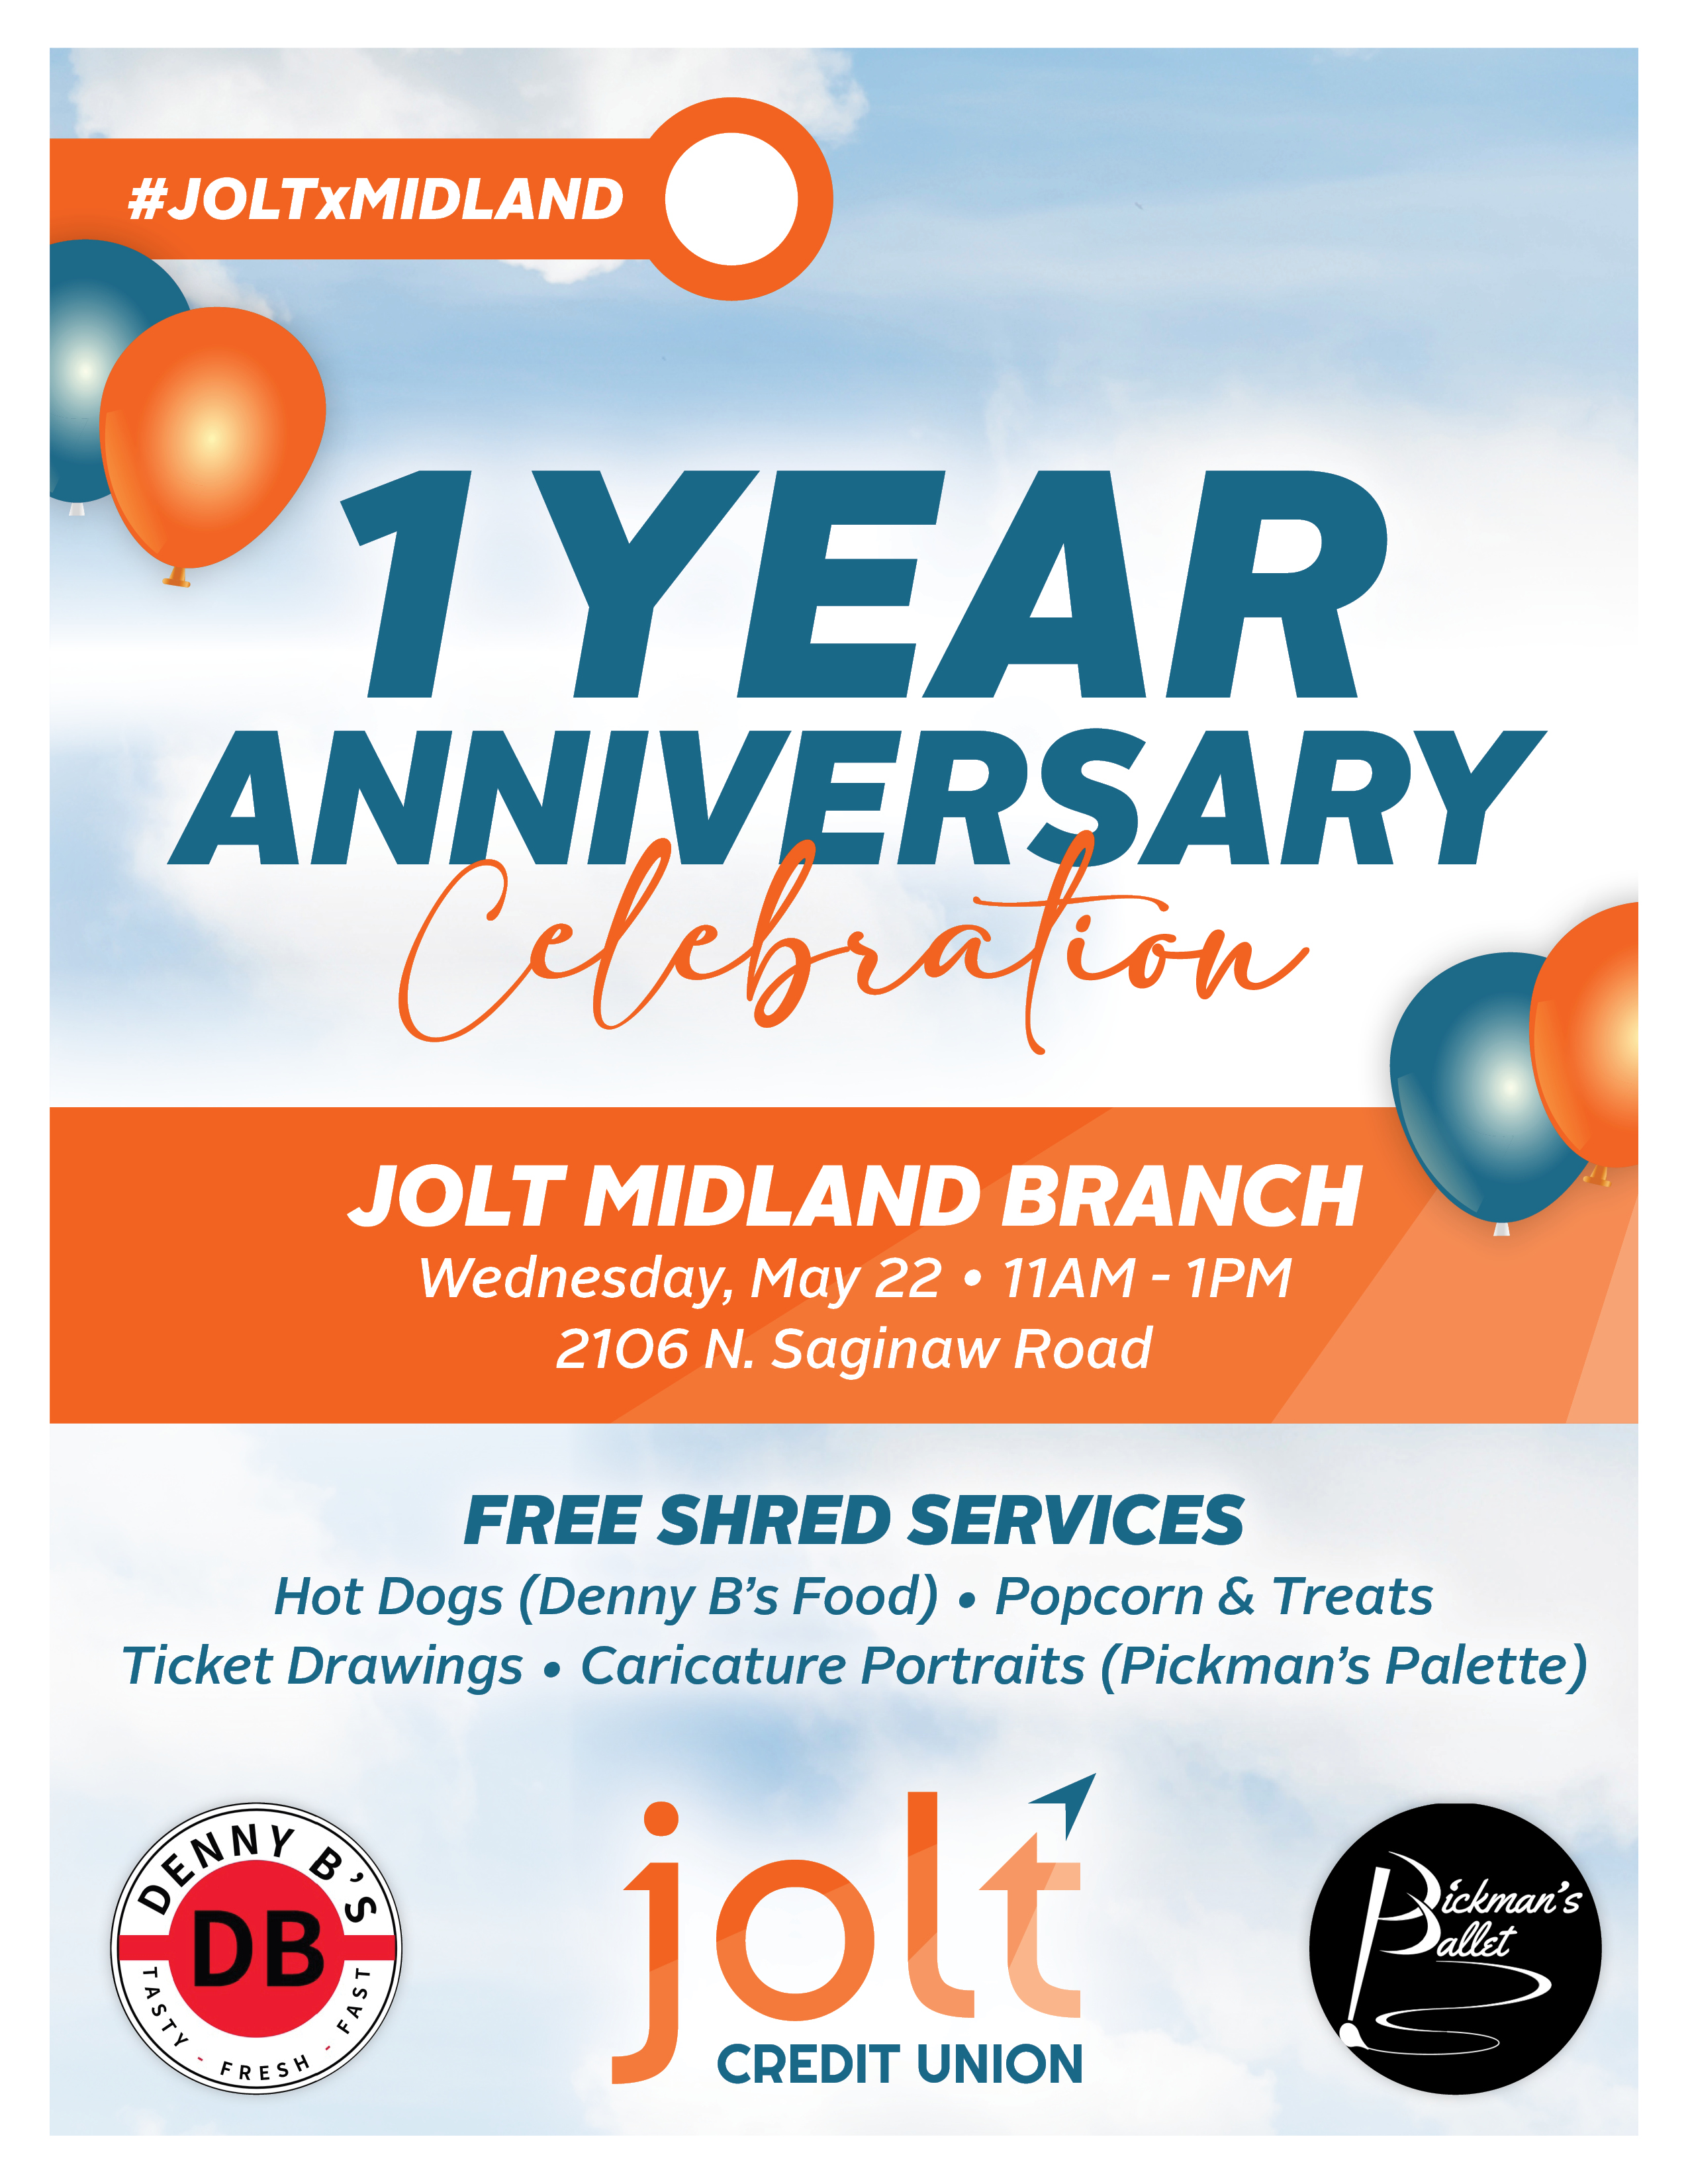 Midland Anniversary and FREE SHRED, May 22 11AM - 1PM